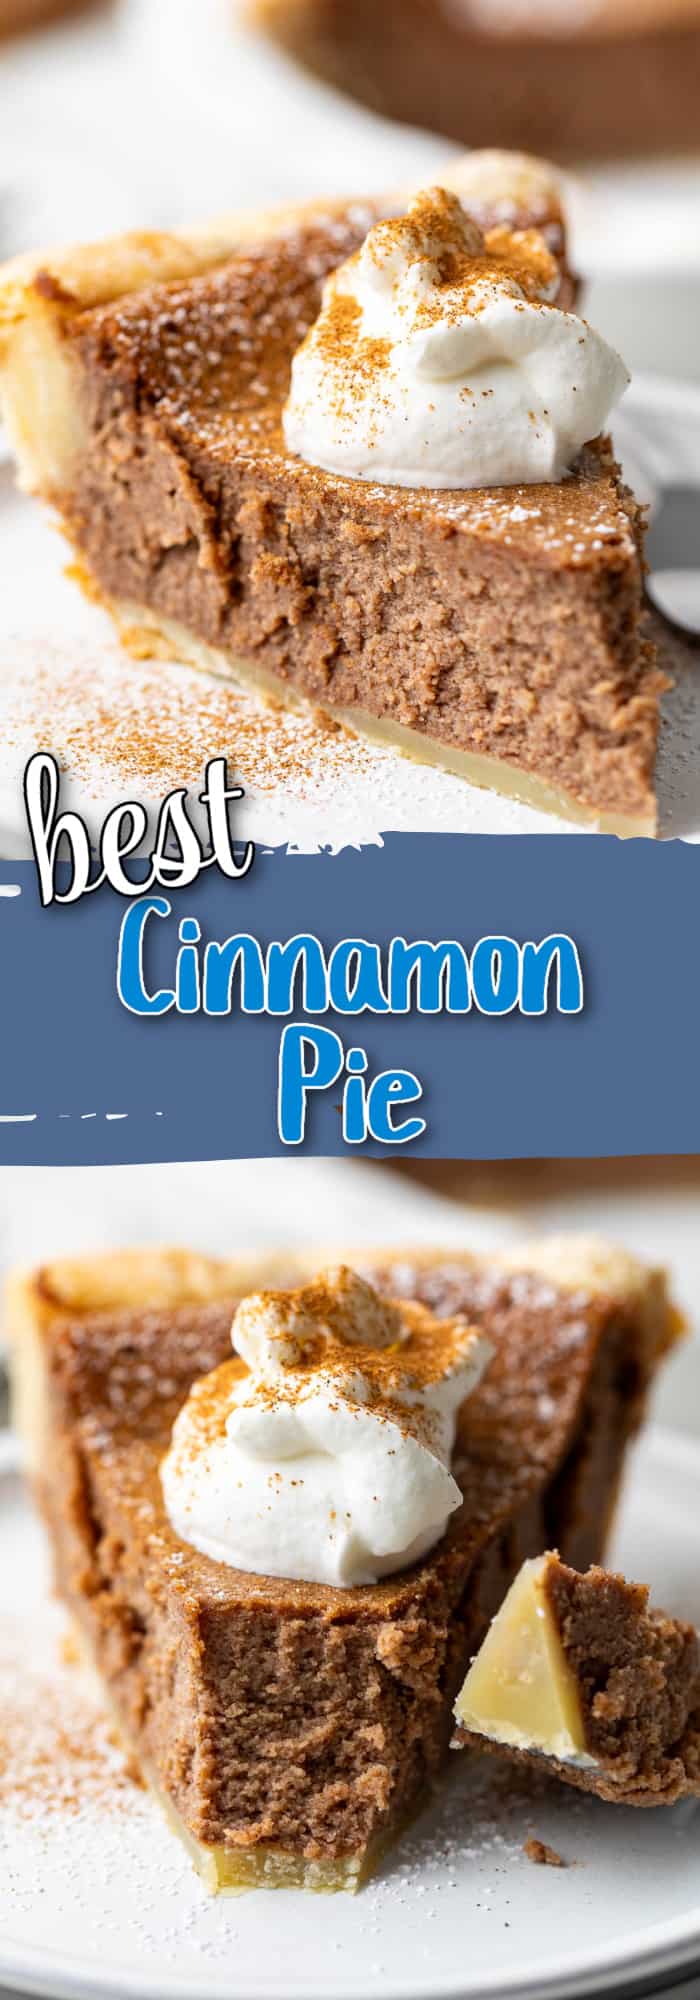 Two photos of cinnamon pie in a collage.